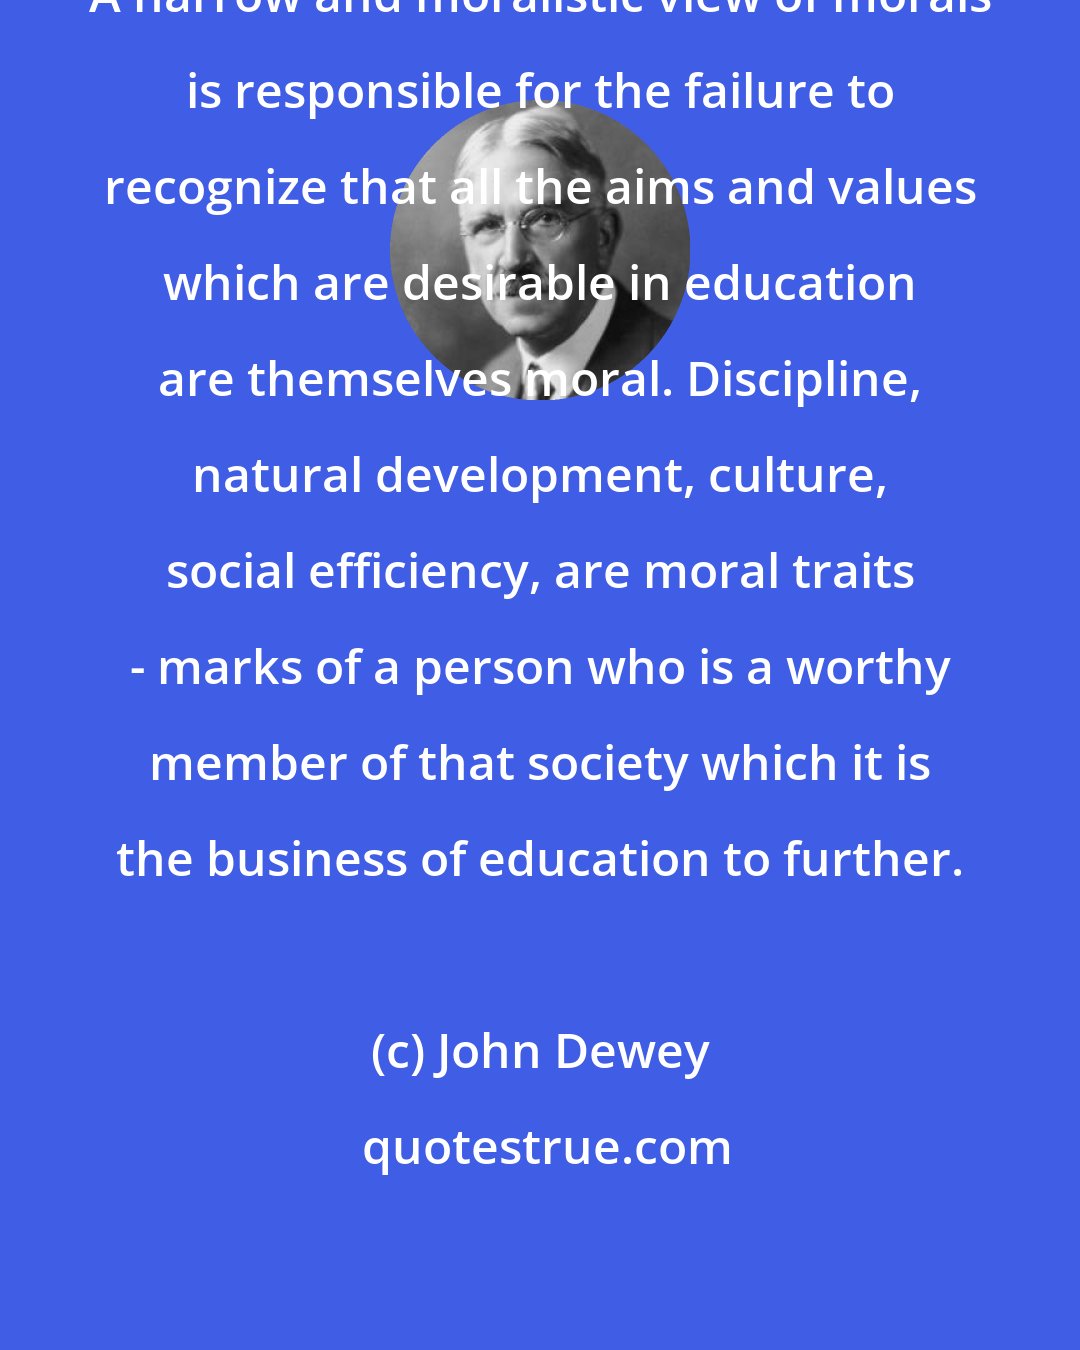 John Dewey: A narrow and moralistic view of morals is responsible for the failure to recognize that all the aims and values which are desirable in education are themselves moral. Discipline, natural development, culture, social efficiency, are moral traits - marks of a person who is a worthy member of that society which it is the business of education to further.